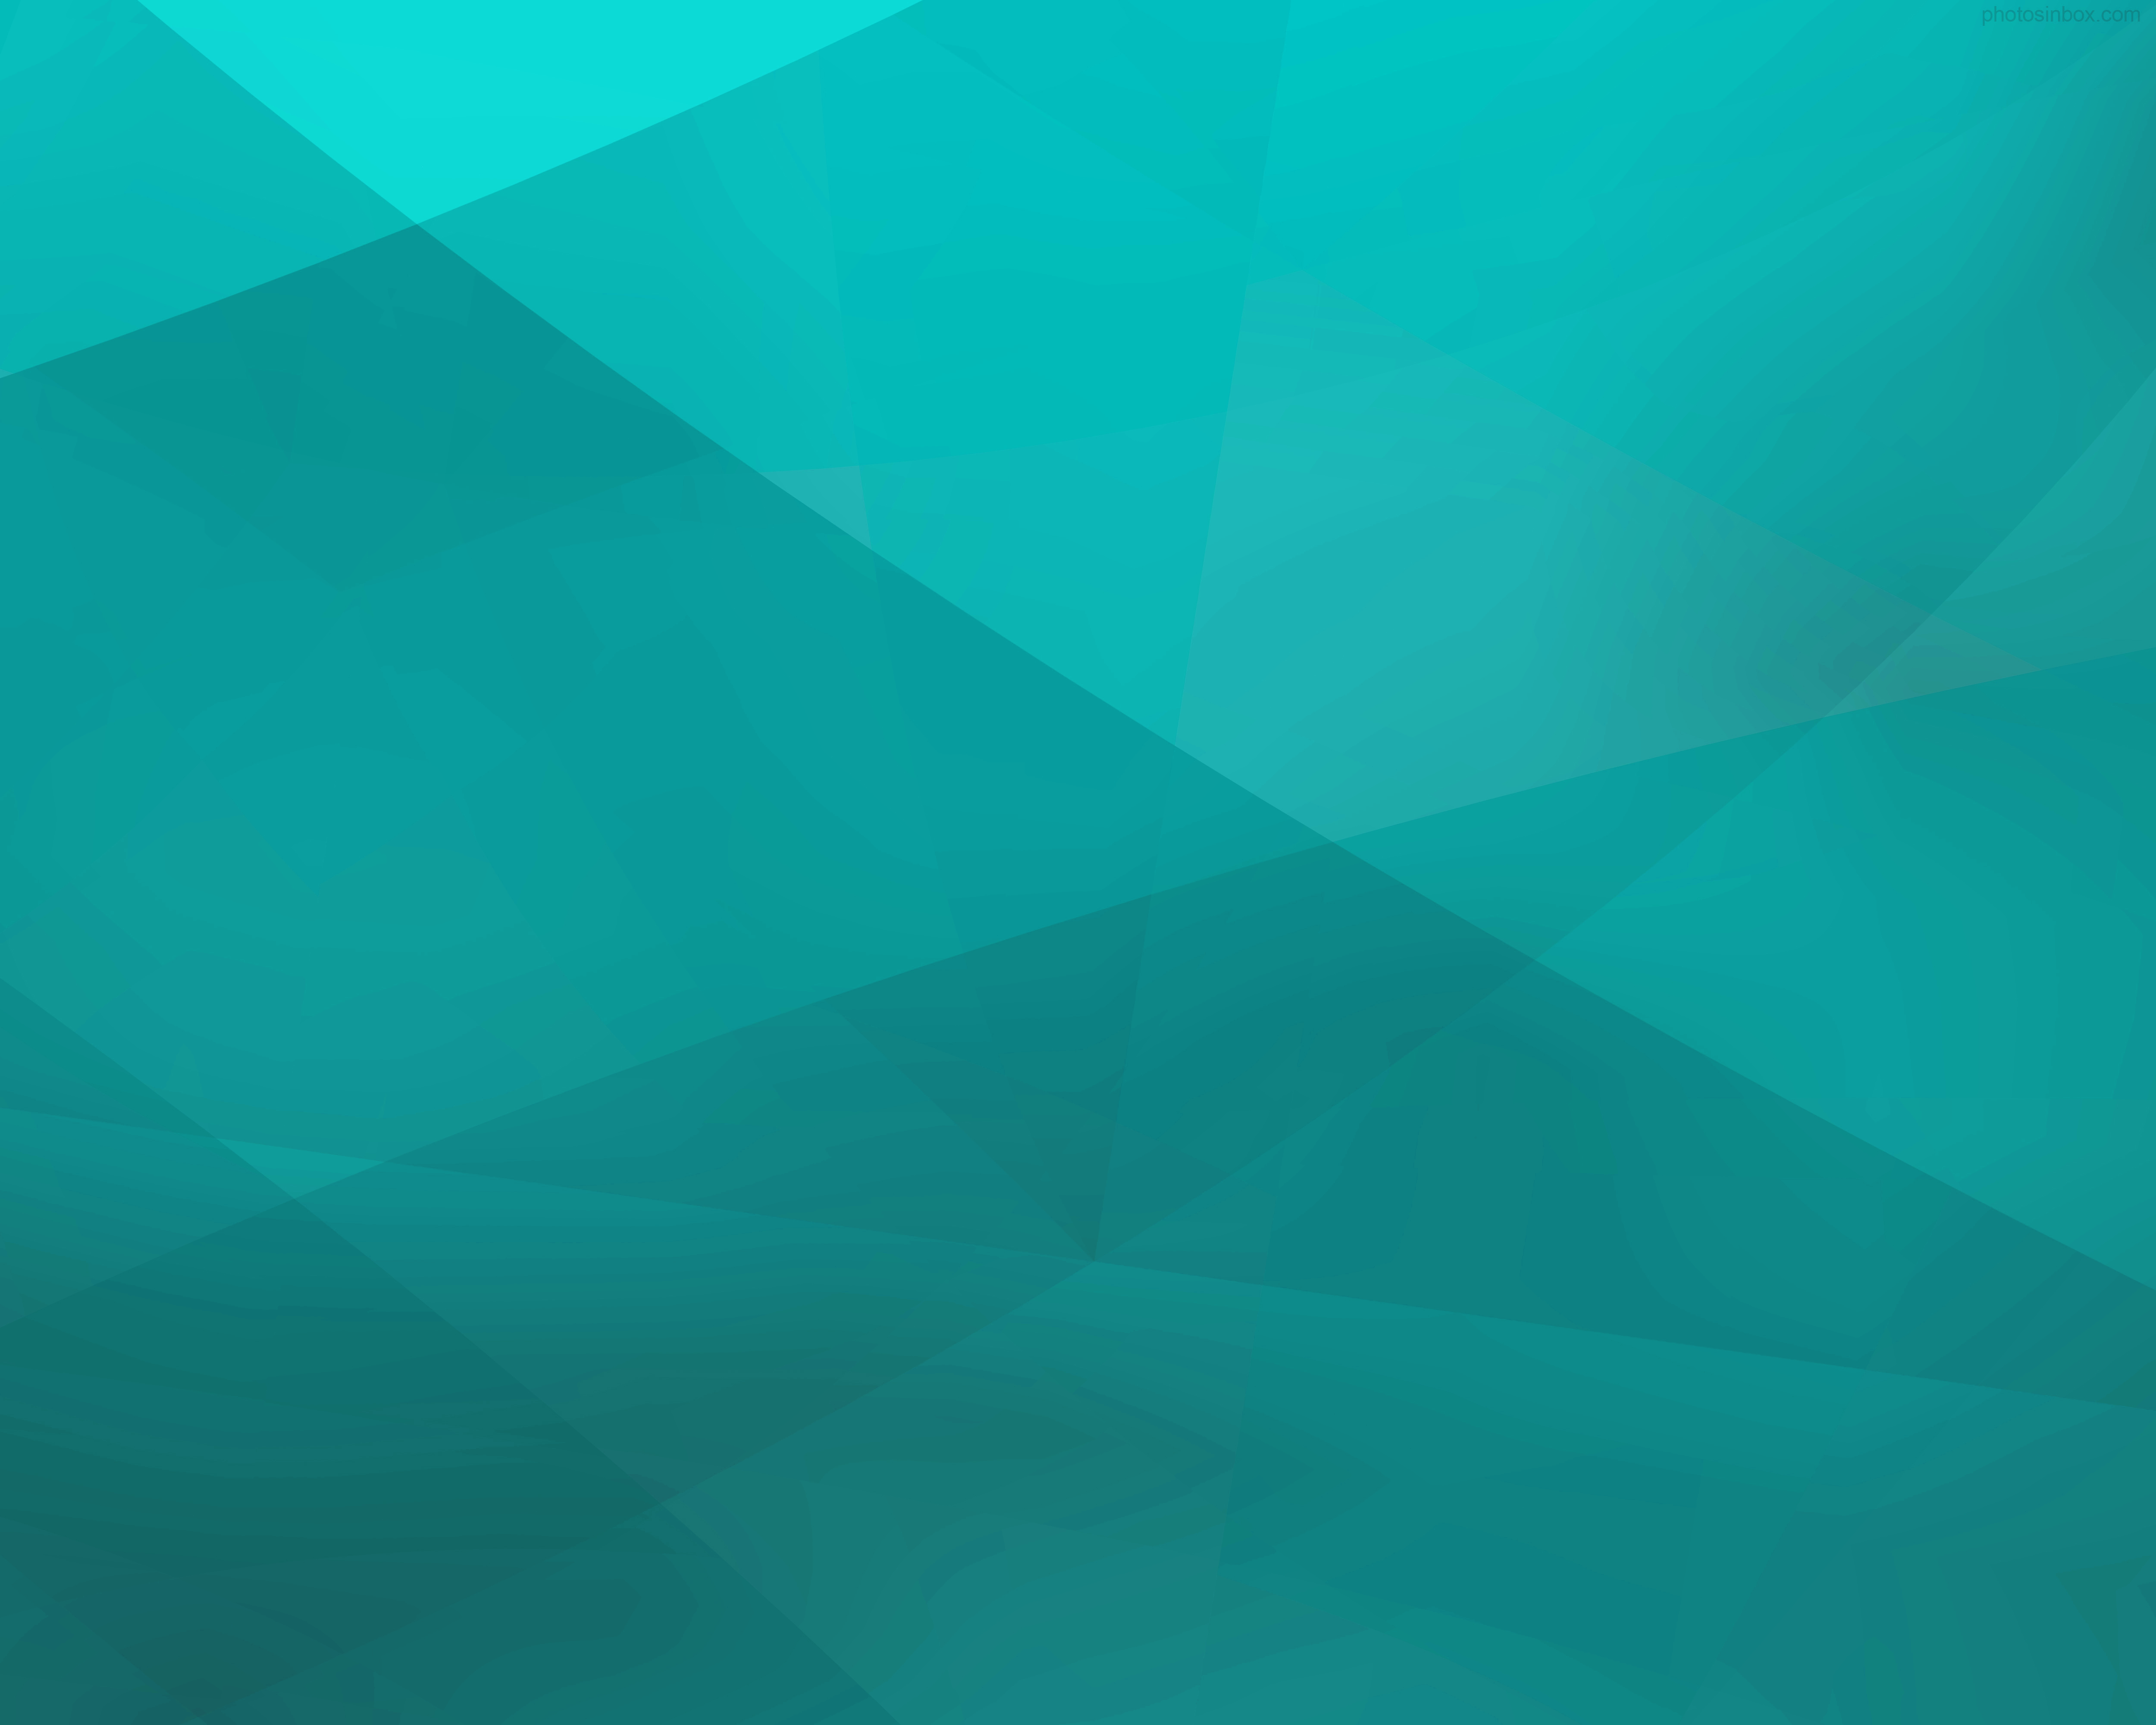 Teal Abstract Slides Backgrounds For Powerpoint Templates Ppt Backgrounds